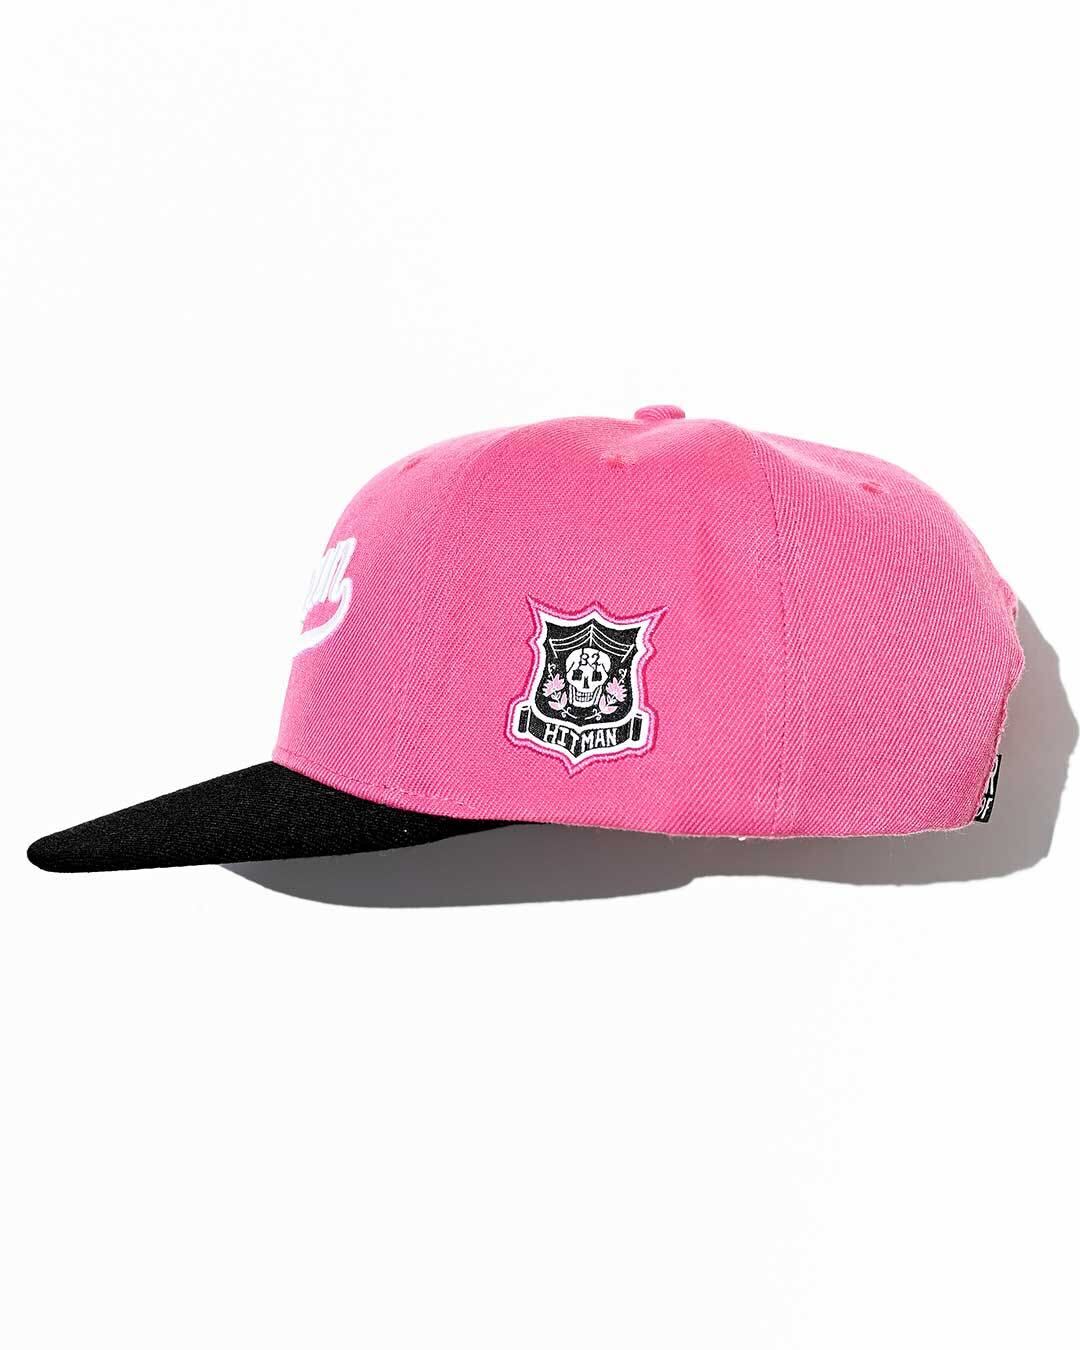 Bret Hart Hitman Pink Snapback Hat - Roots of Fight Canada